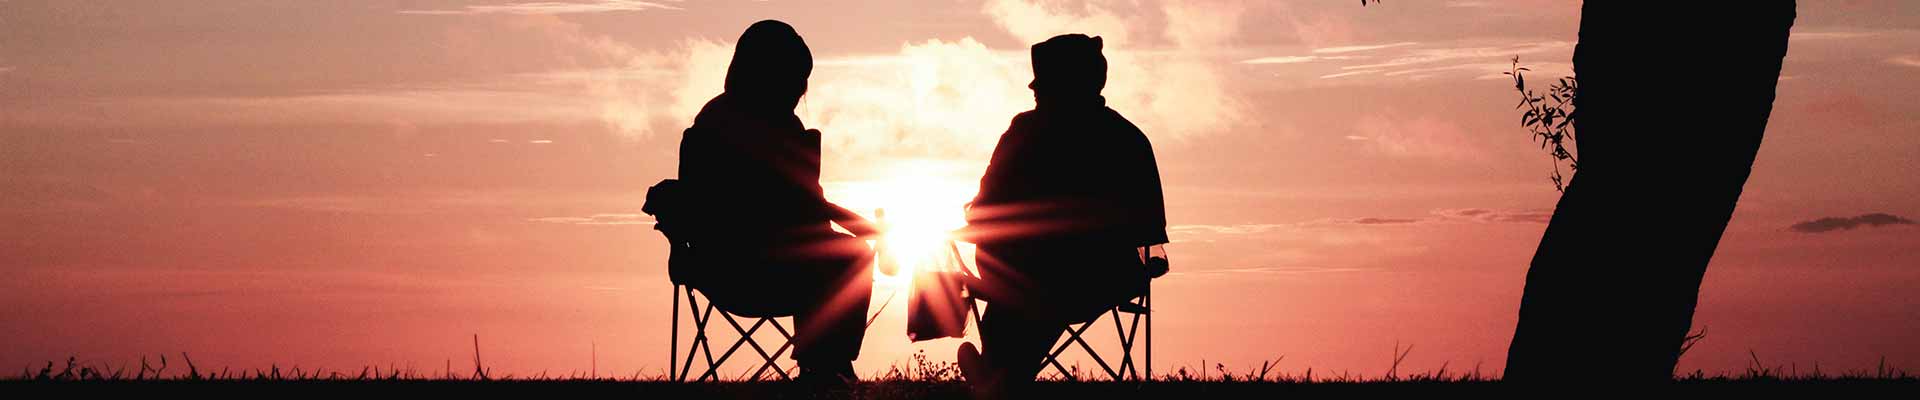 two people sitting in front of a sunset